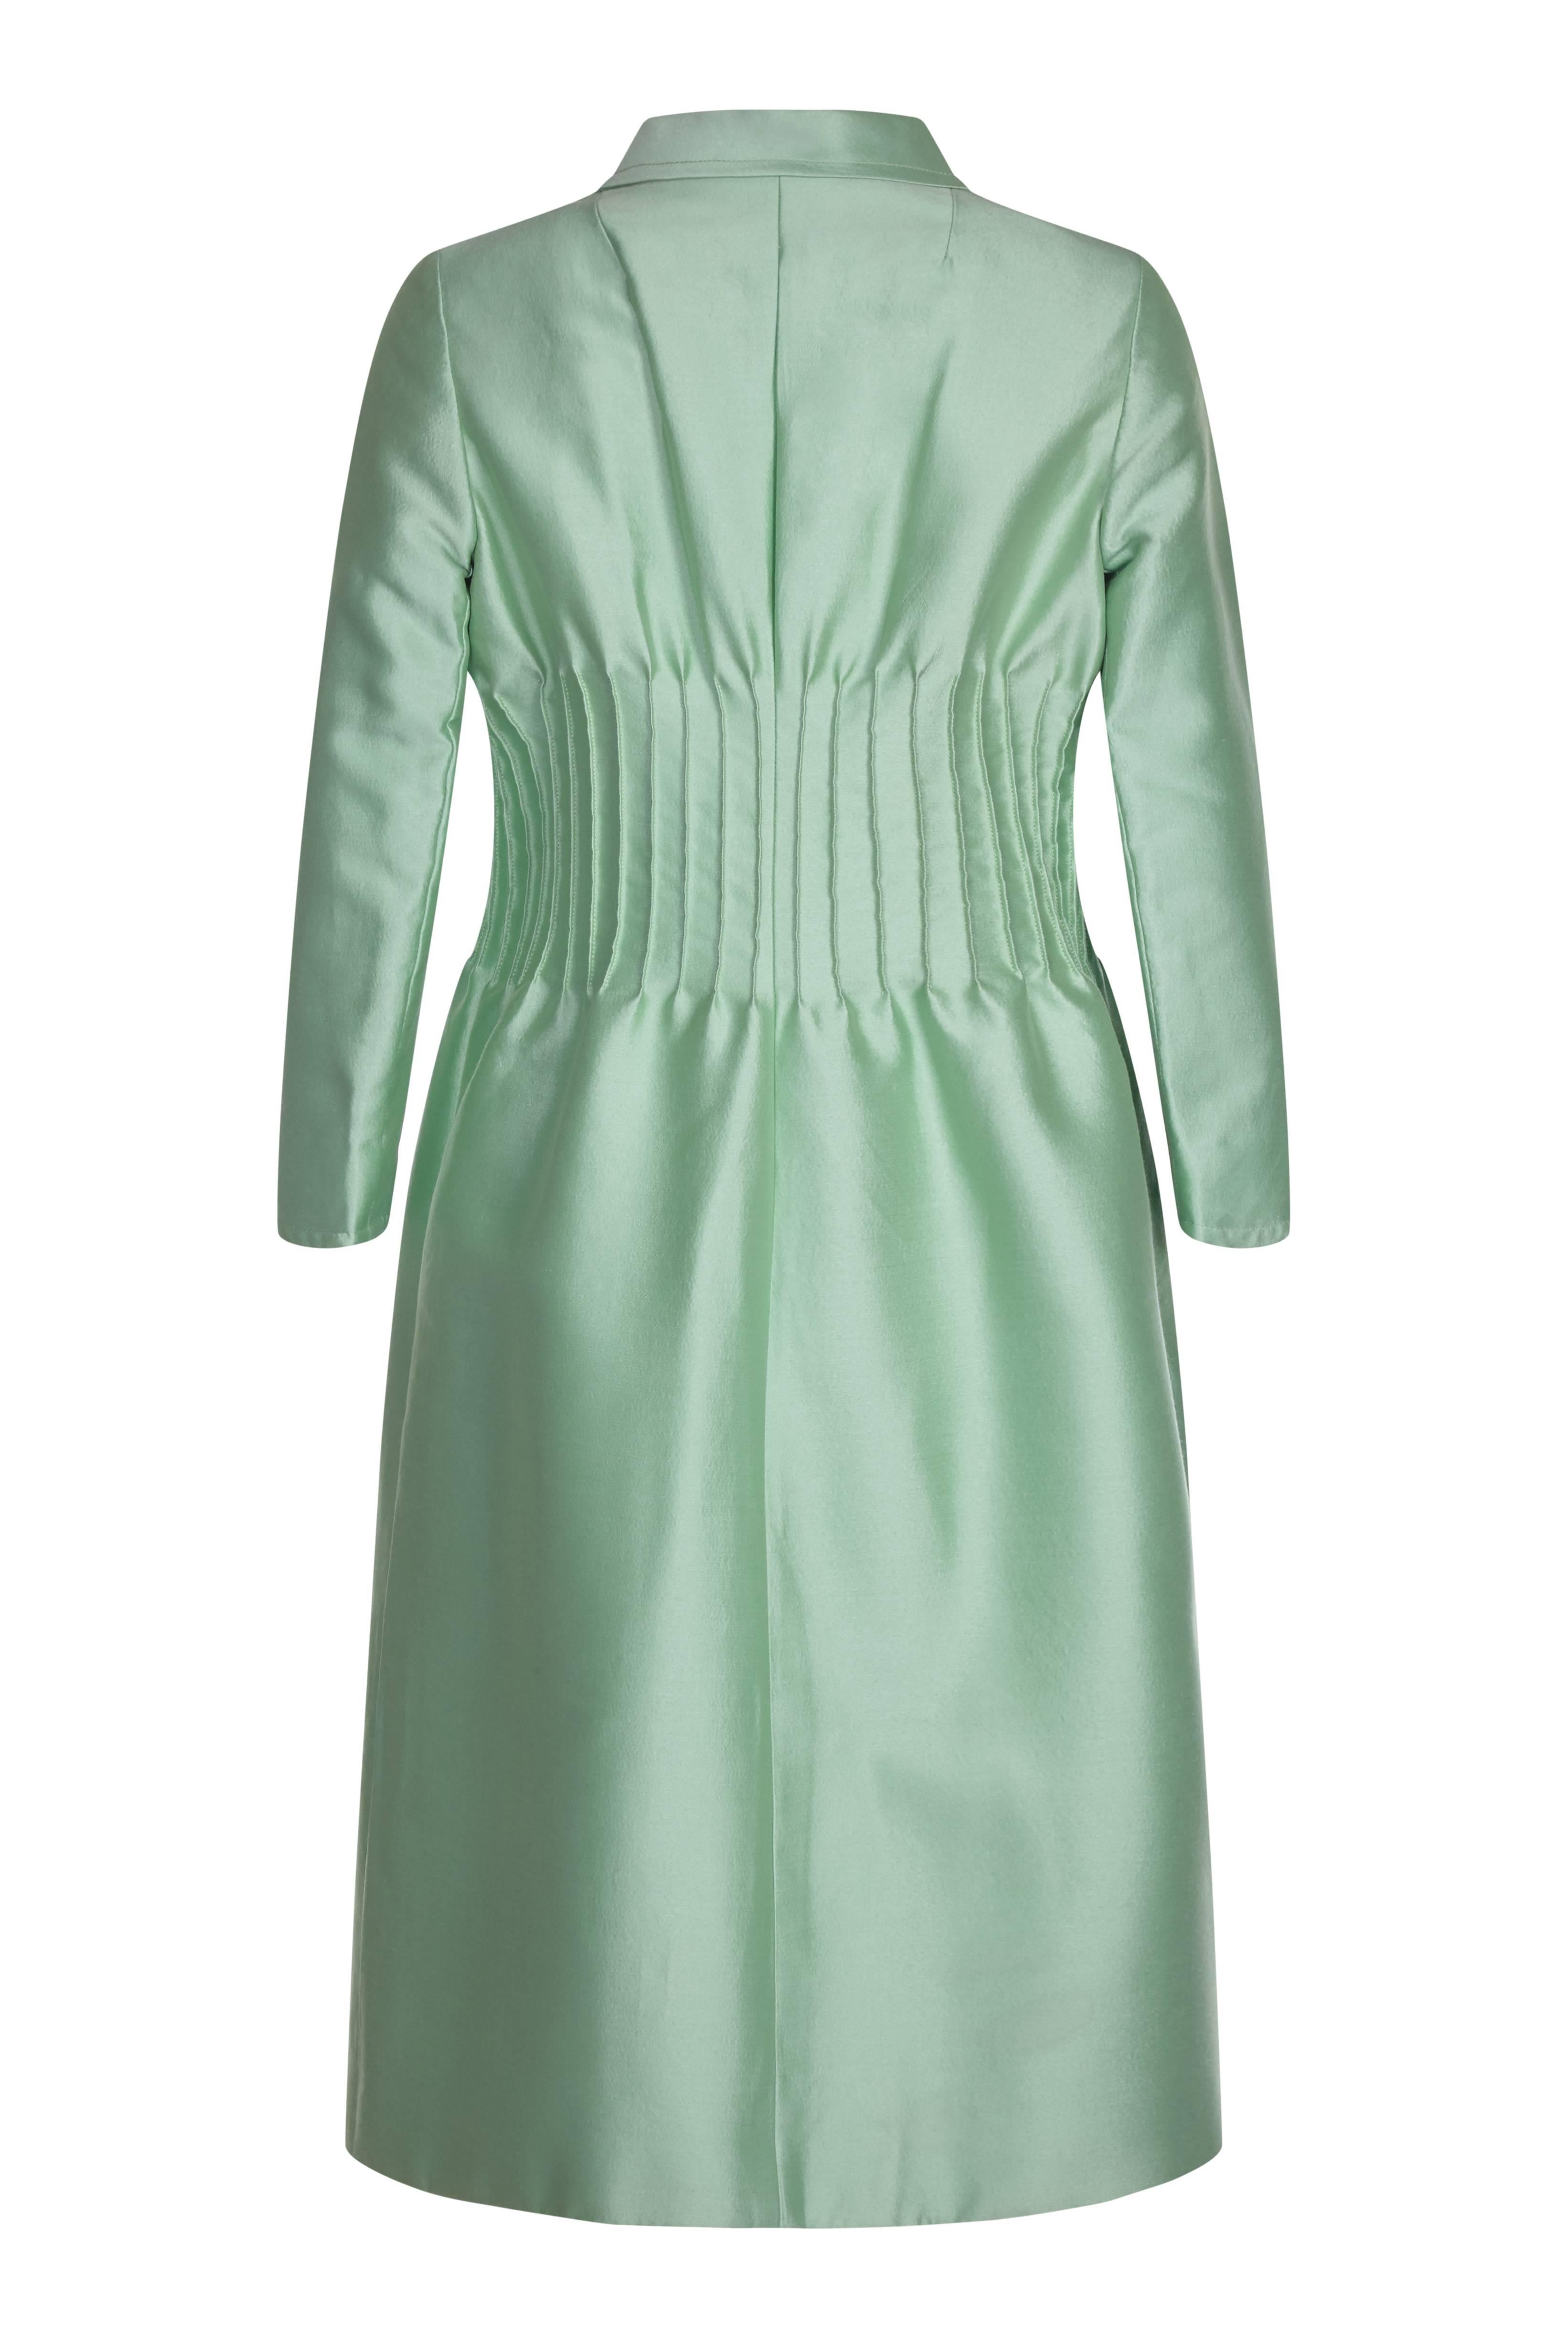 Chic 1968 Valentino vintage silk dress suit in seafoam green in exceptional, museum quality condition. Part of a diffusion collection for British department store Debenhams and Freebody, this set echoes the sophisticated tailoring of the designer's